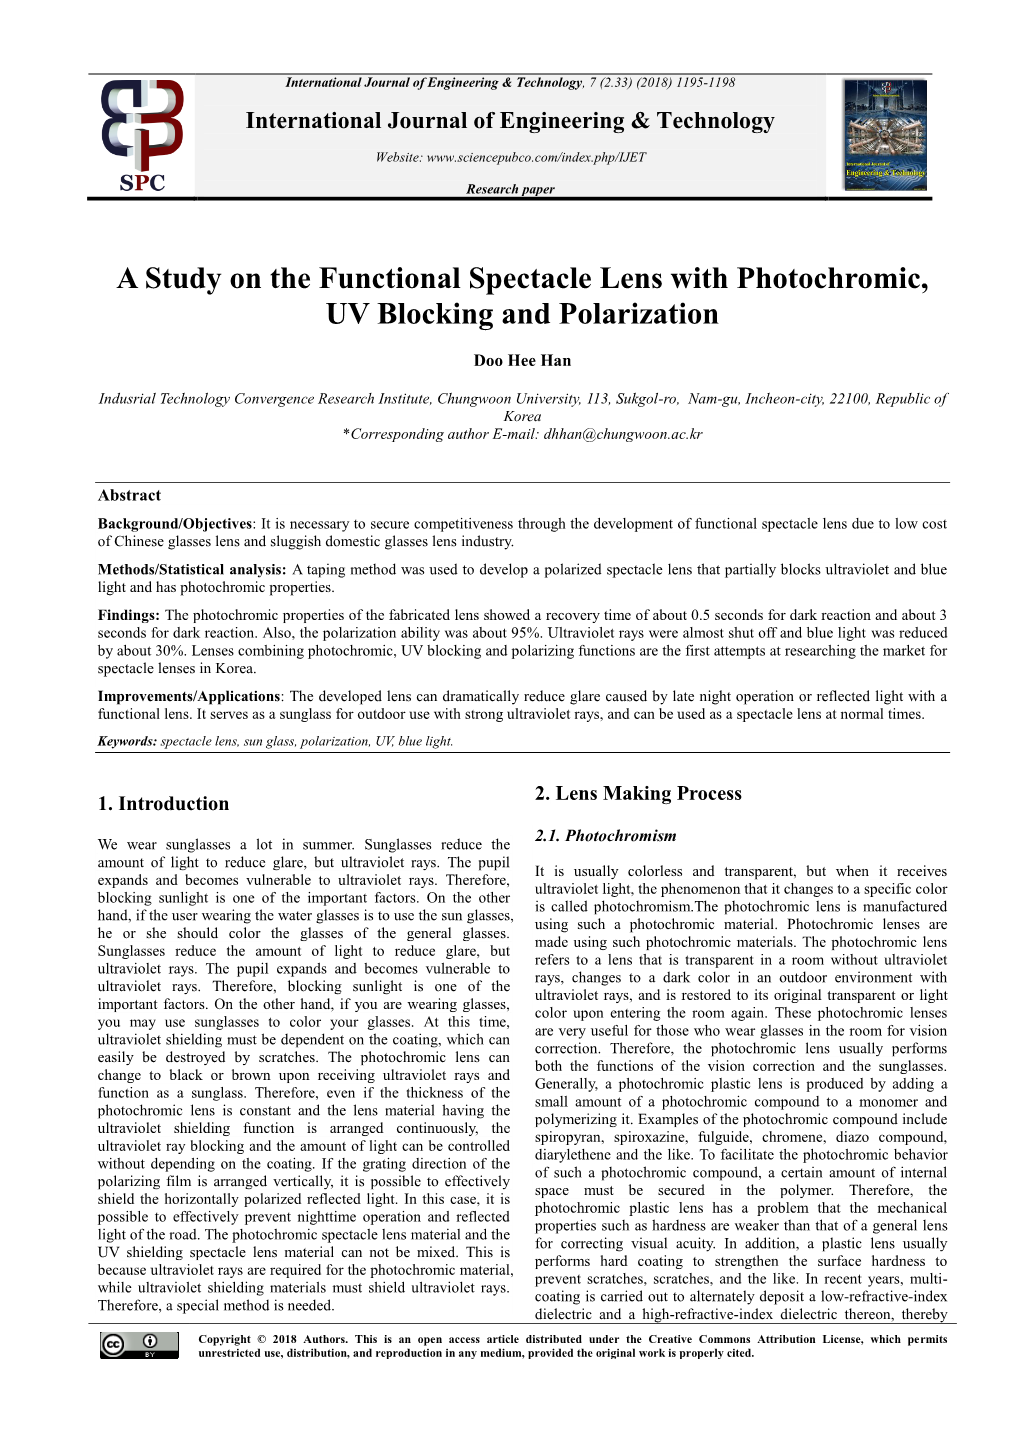 A Study on the Functional Spectacle Lens with Photochromic, UV Blocking and Polarization